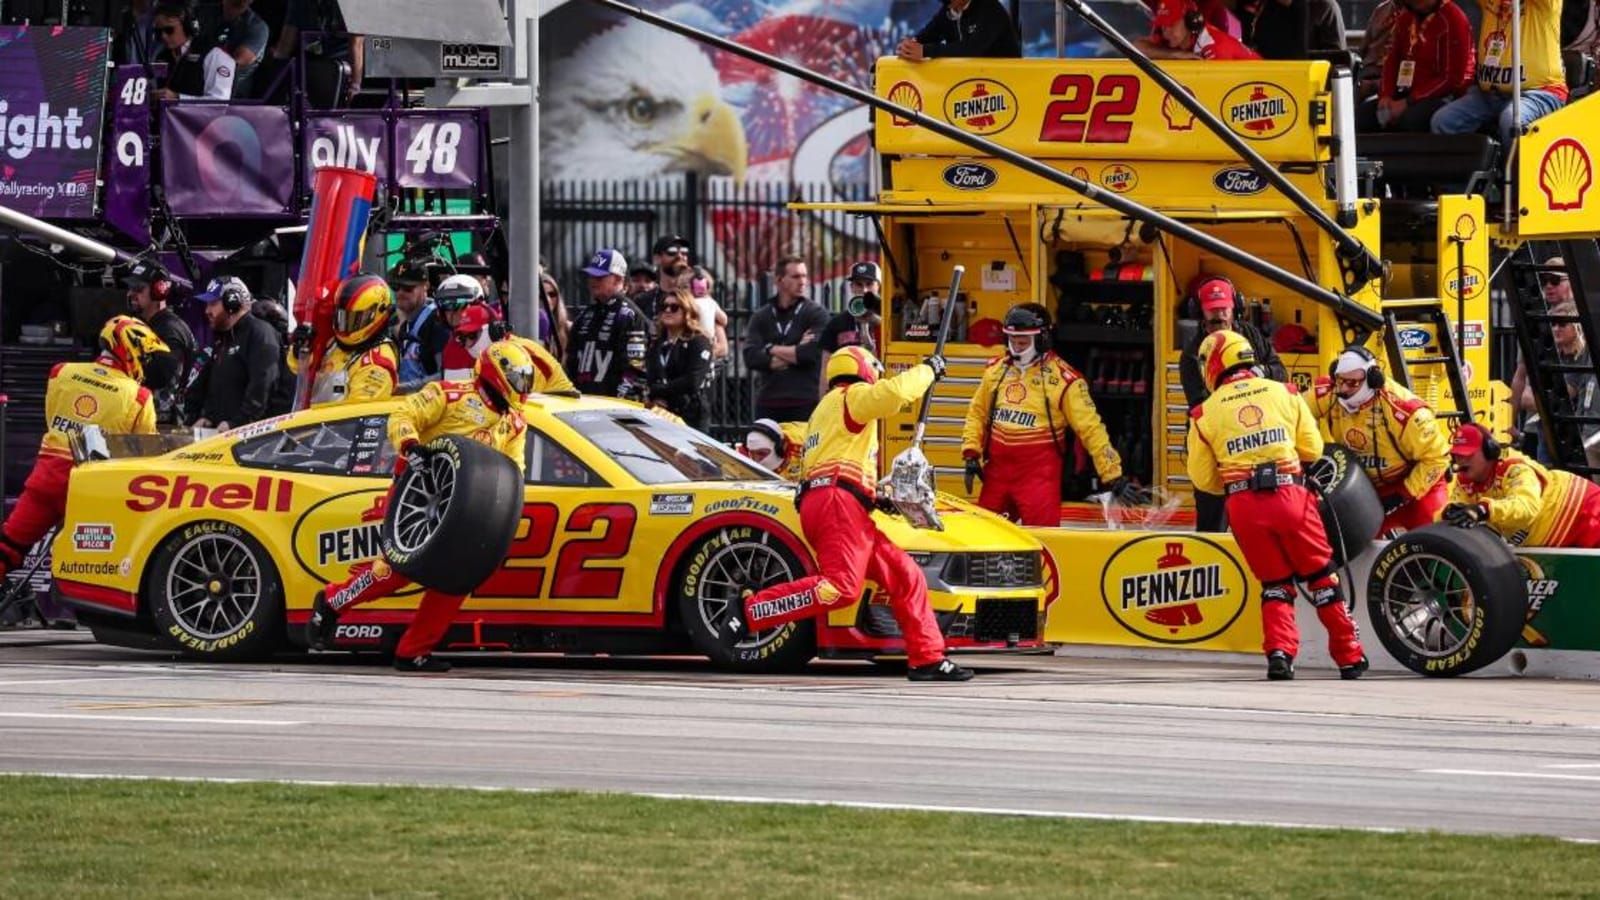 Joey Logano causes wreck late in Stage 2, leaves Denny Hamlin furious